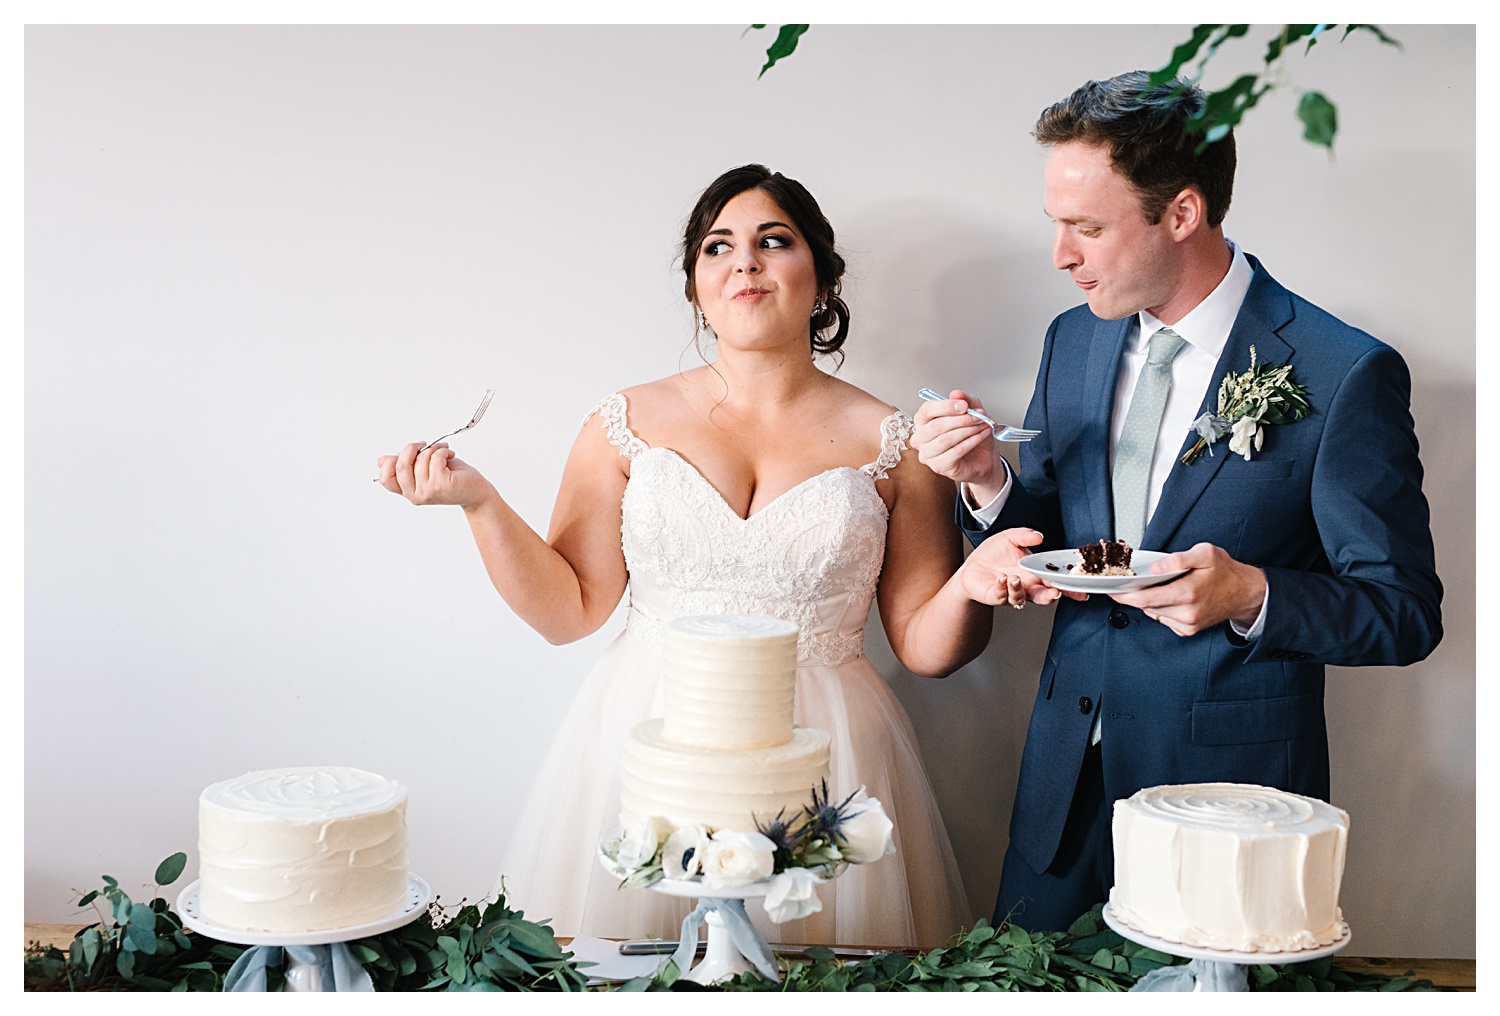 bride smiling with wedding cake in mouth